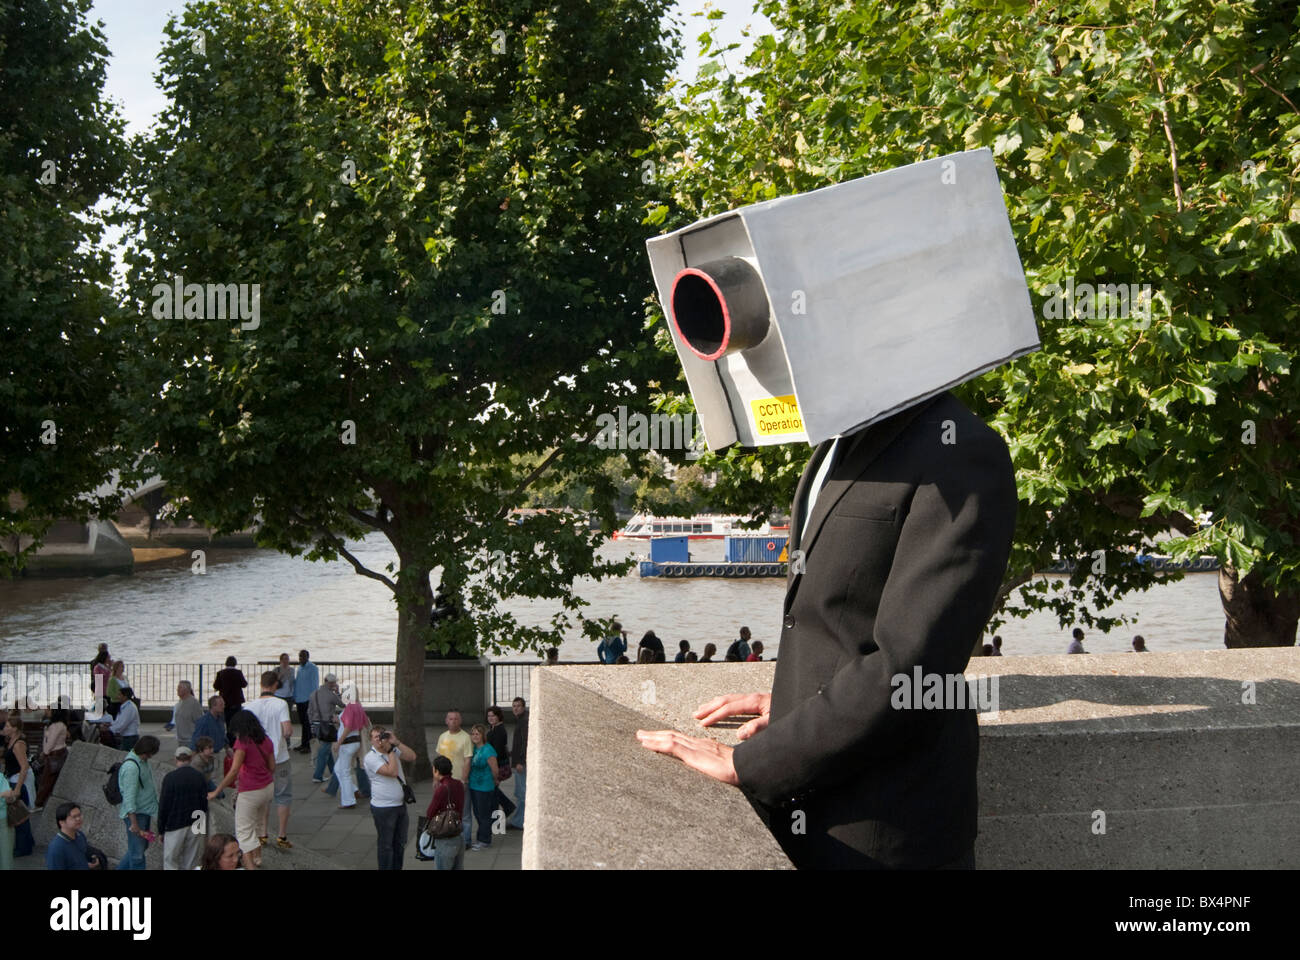 Actor playing the part of a CCTV camera in the South Bank center London during the Thames festival. Stock Photo